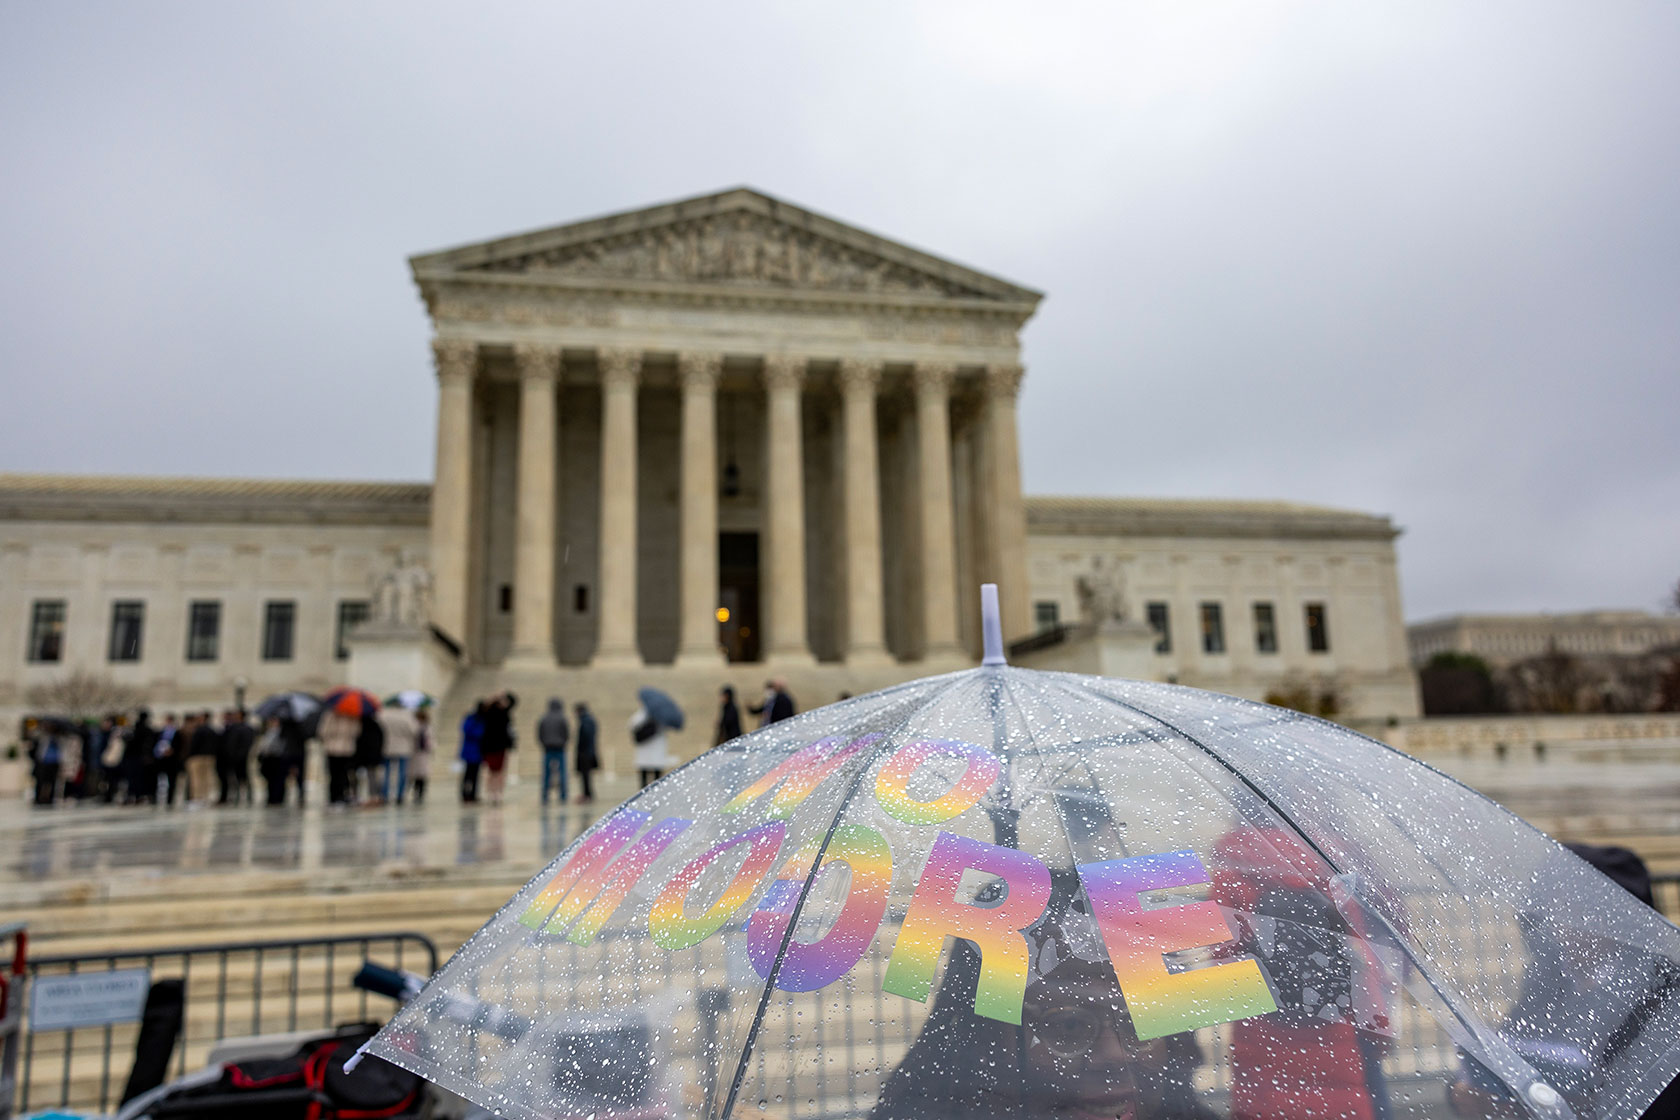 Demonstrators protest during a rally at the U.S. Supreme Court during oral arguments in Moore v. Harper.